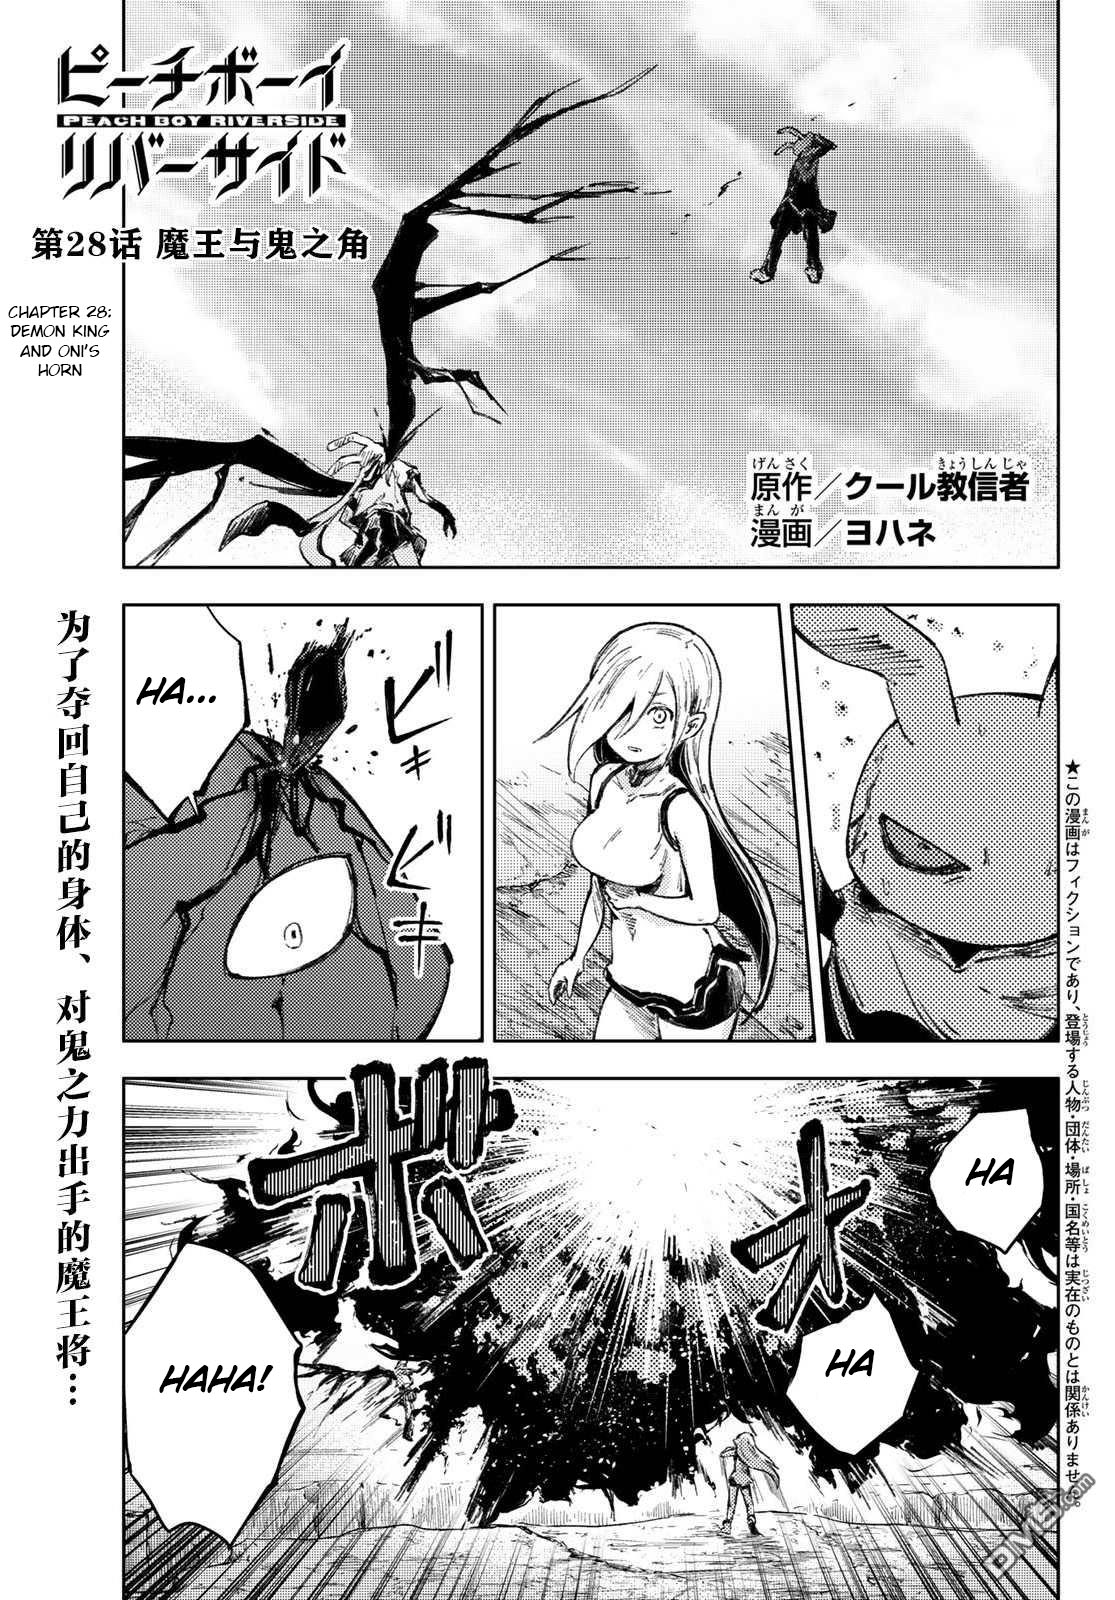 Peach Boy Riverside Chapter 28: Demon King And Oni's Horn - Picture 1